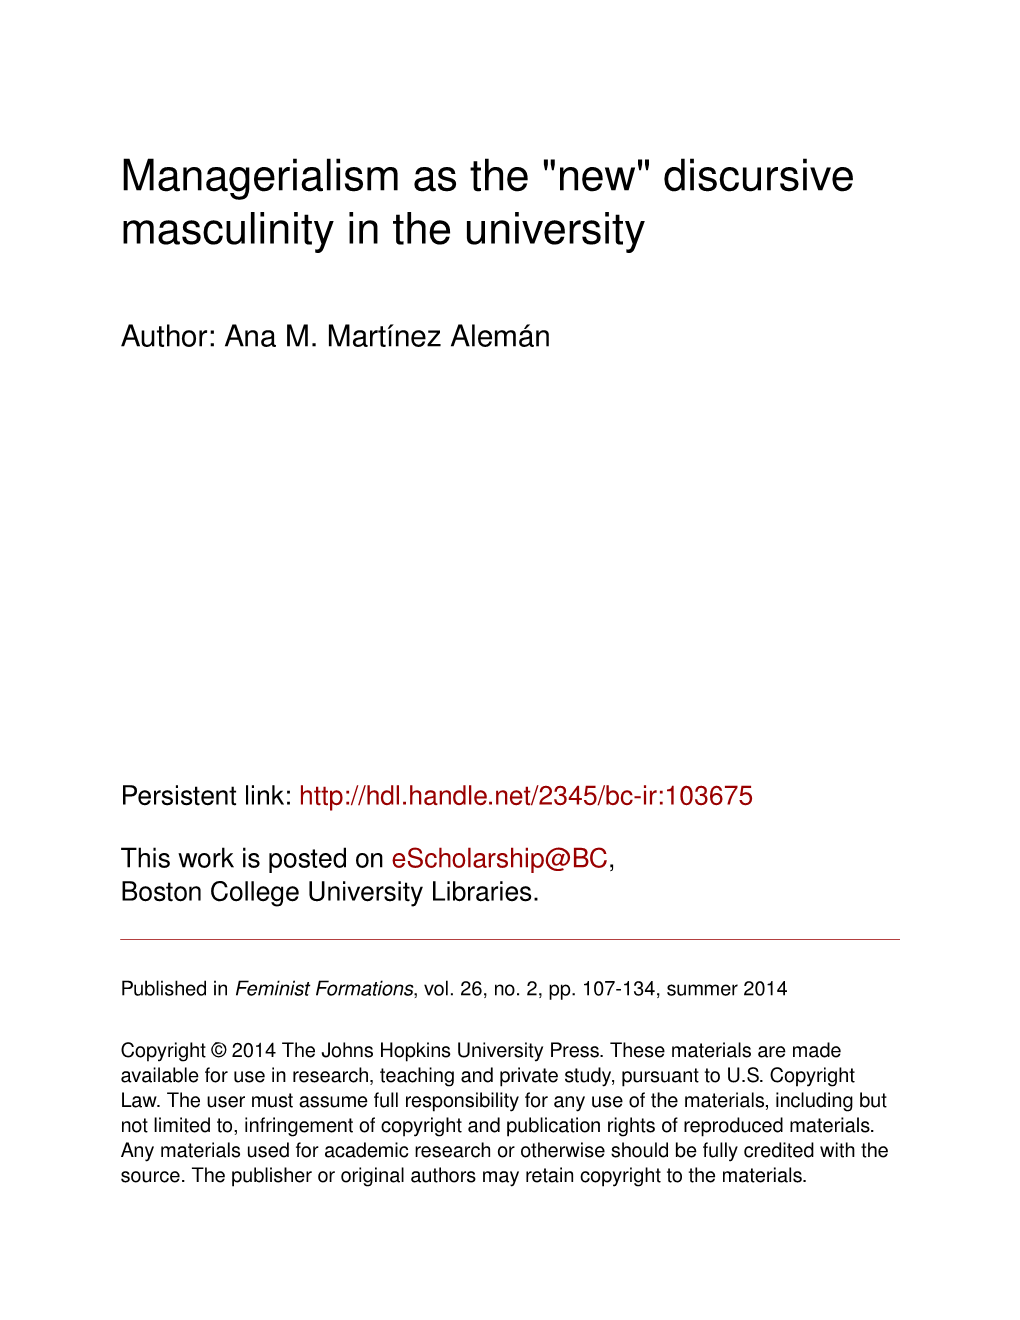 Managerialism As the "New" Discursive Masculinity in the University